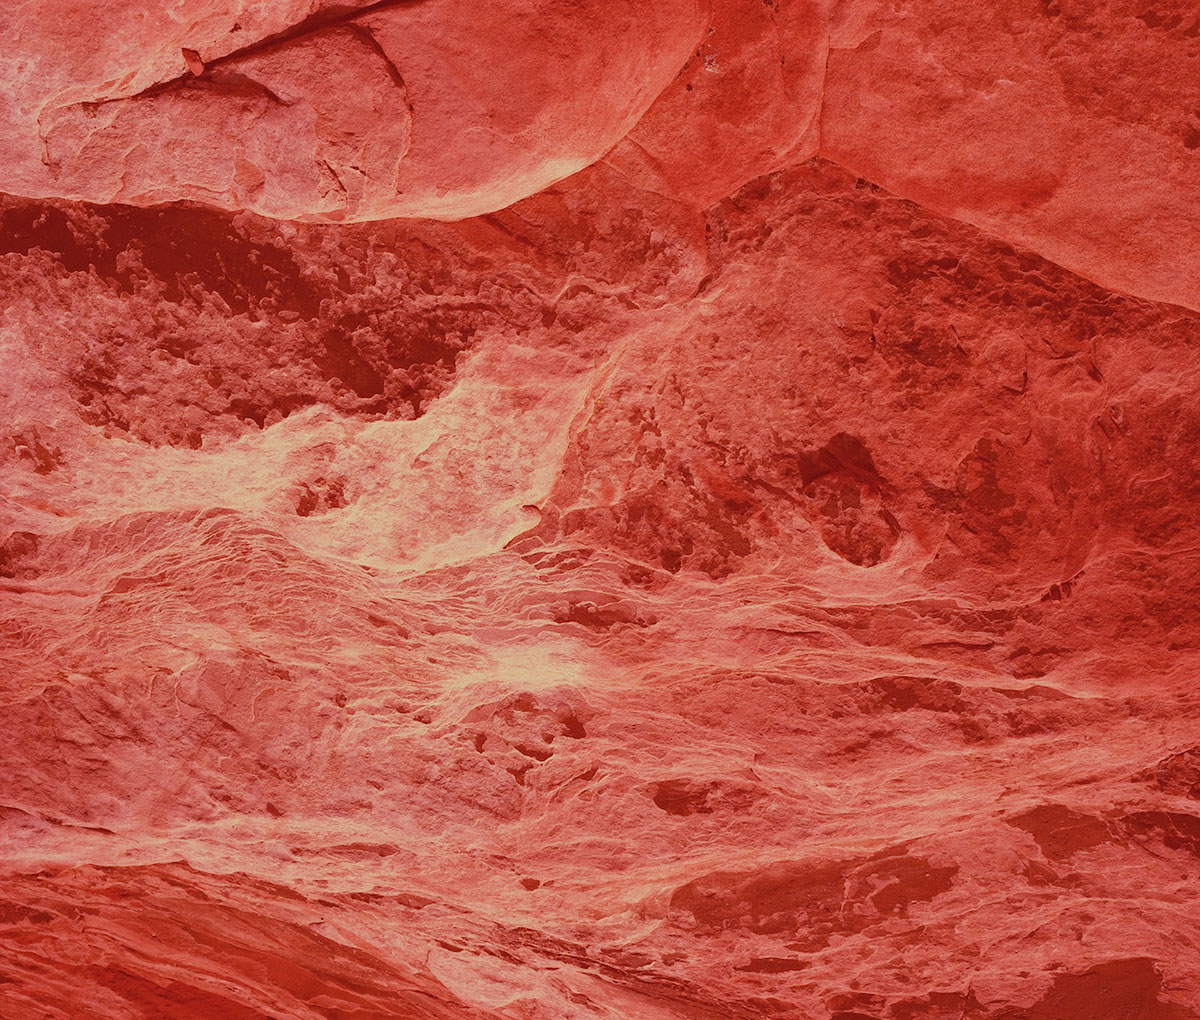 David Benjamin Sherry, <em>Electric Crimson Mountain, Utah</em>, 2012. Traditional Color Darkroom Photograph, 30 × 40 inches. Courtesy of the artist and Salon 94, New York.